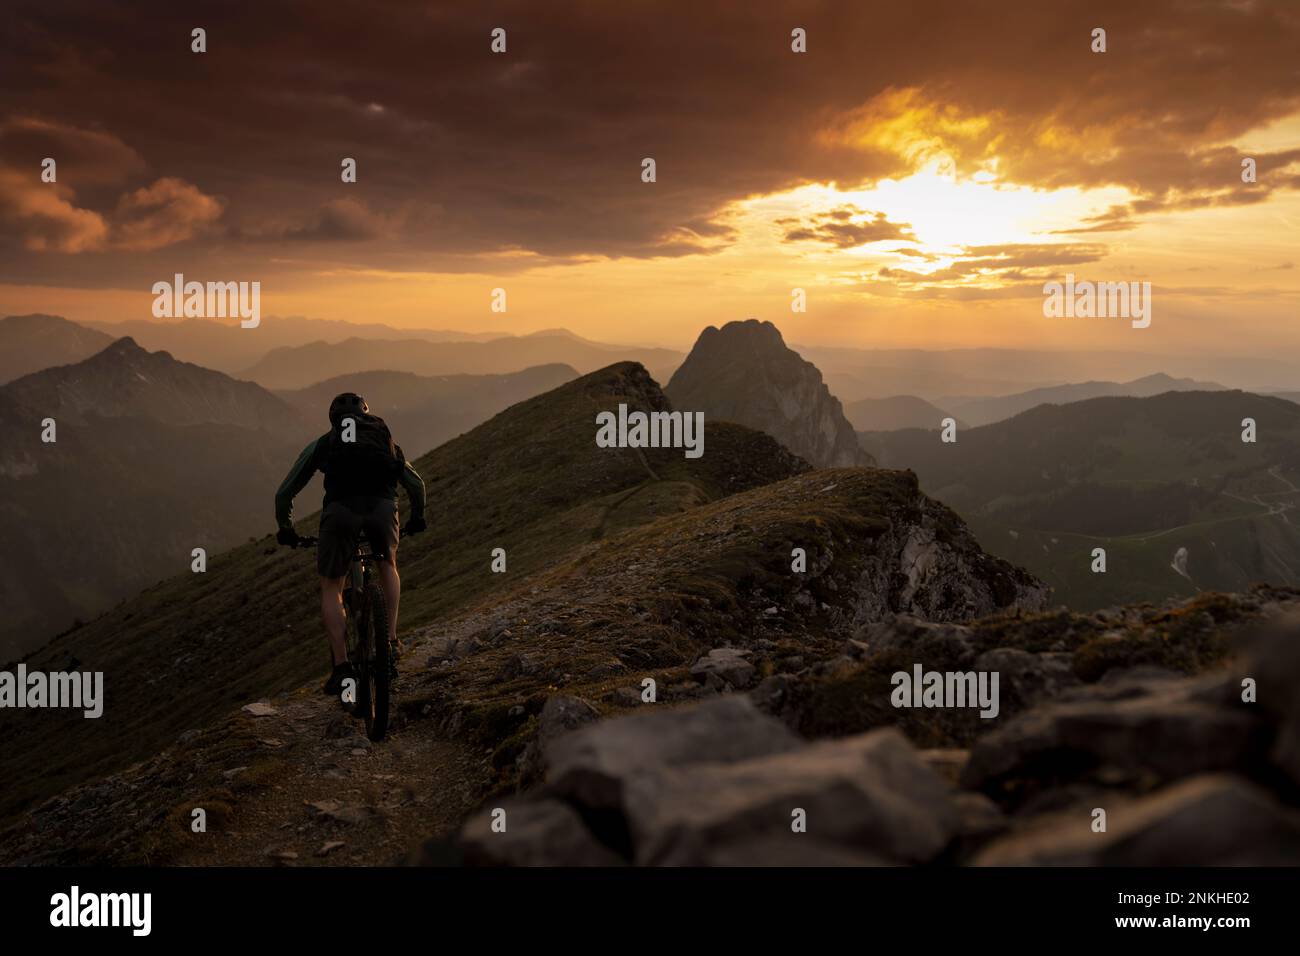 Man cycling on mountain at sunset Stock Photo